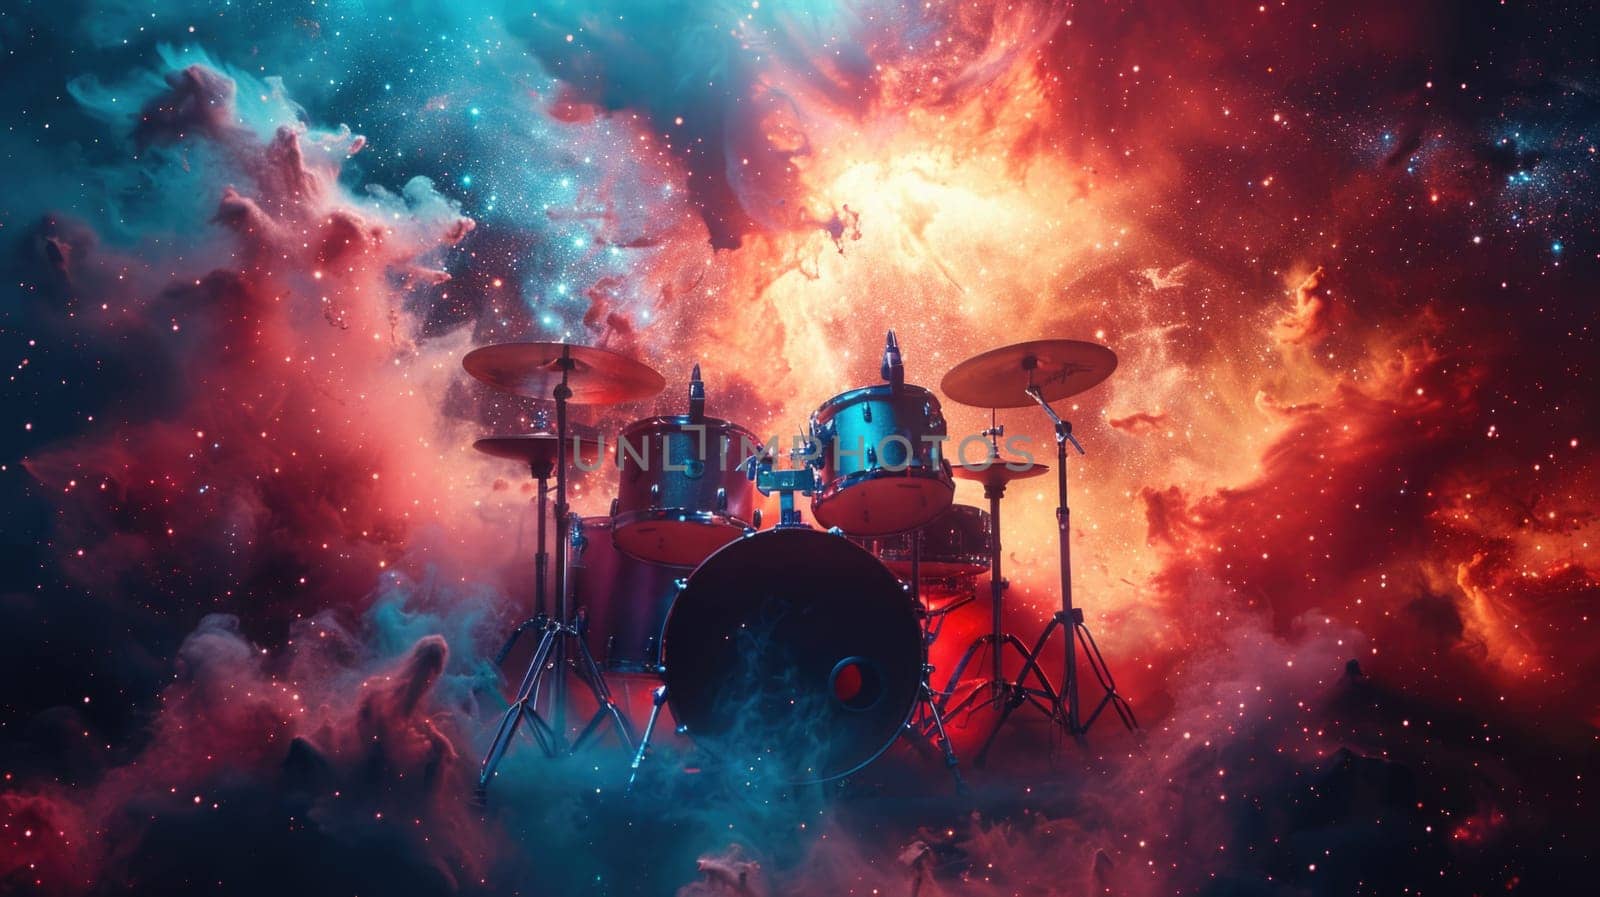 Drum kit placed in the center of a room filled with stars, creating a unique and captivating visual contrast.